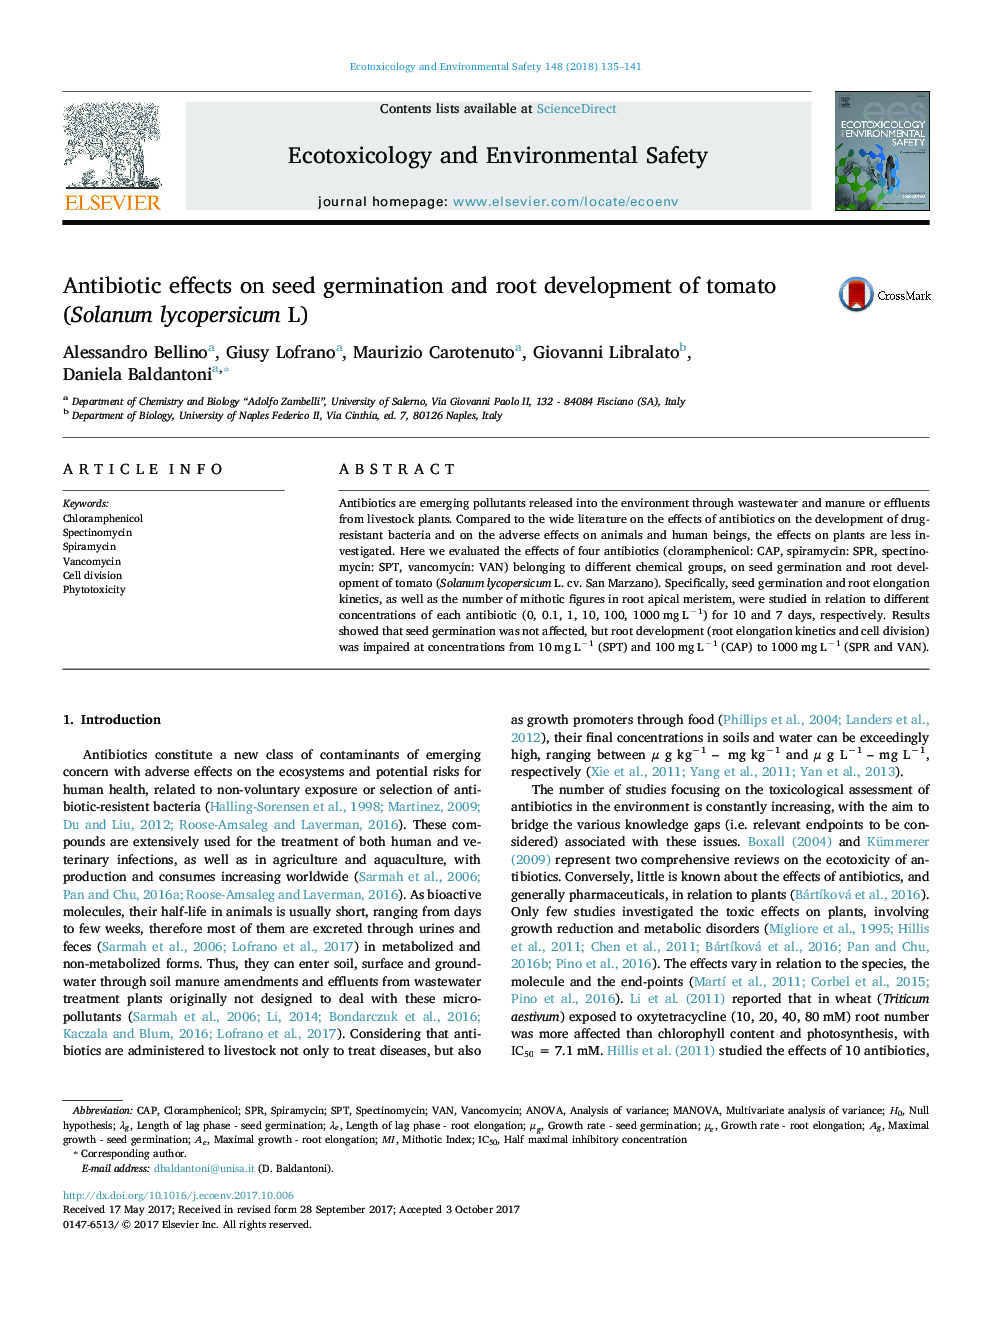 Antibiotic effects on seed germination and root development of tomato (Solanum lycopersicum L.)